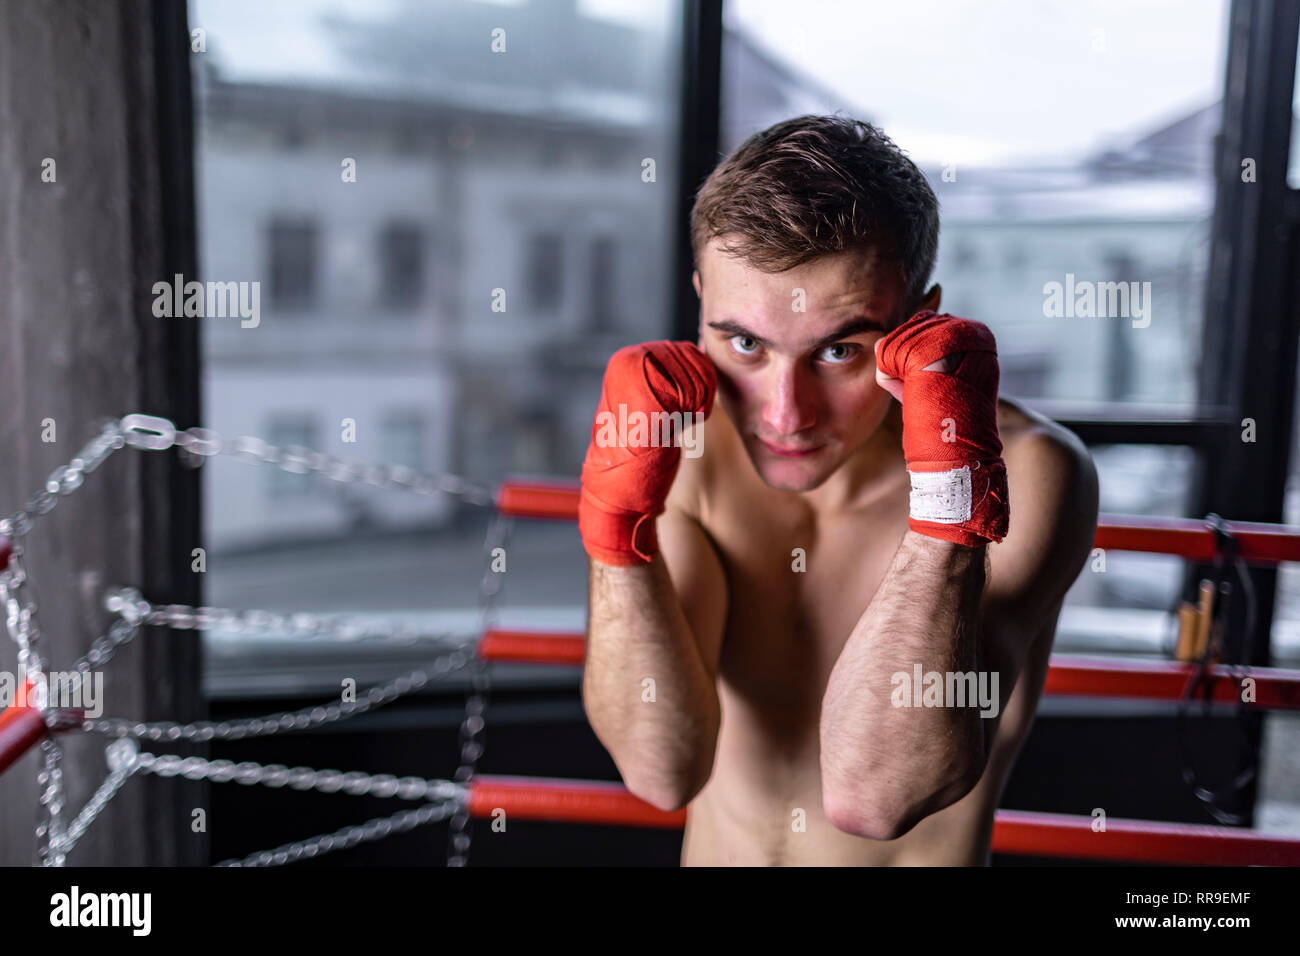 Boxing man with red bandages in the ring Stock Photo